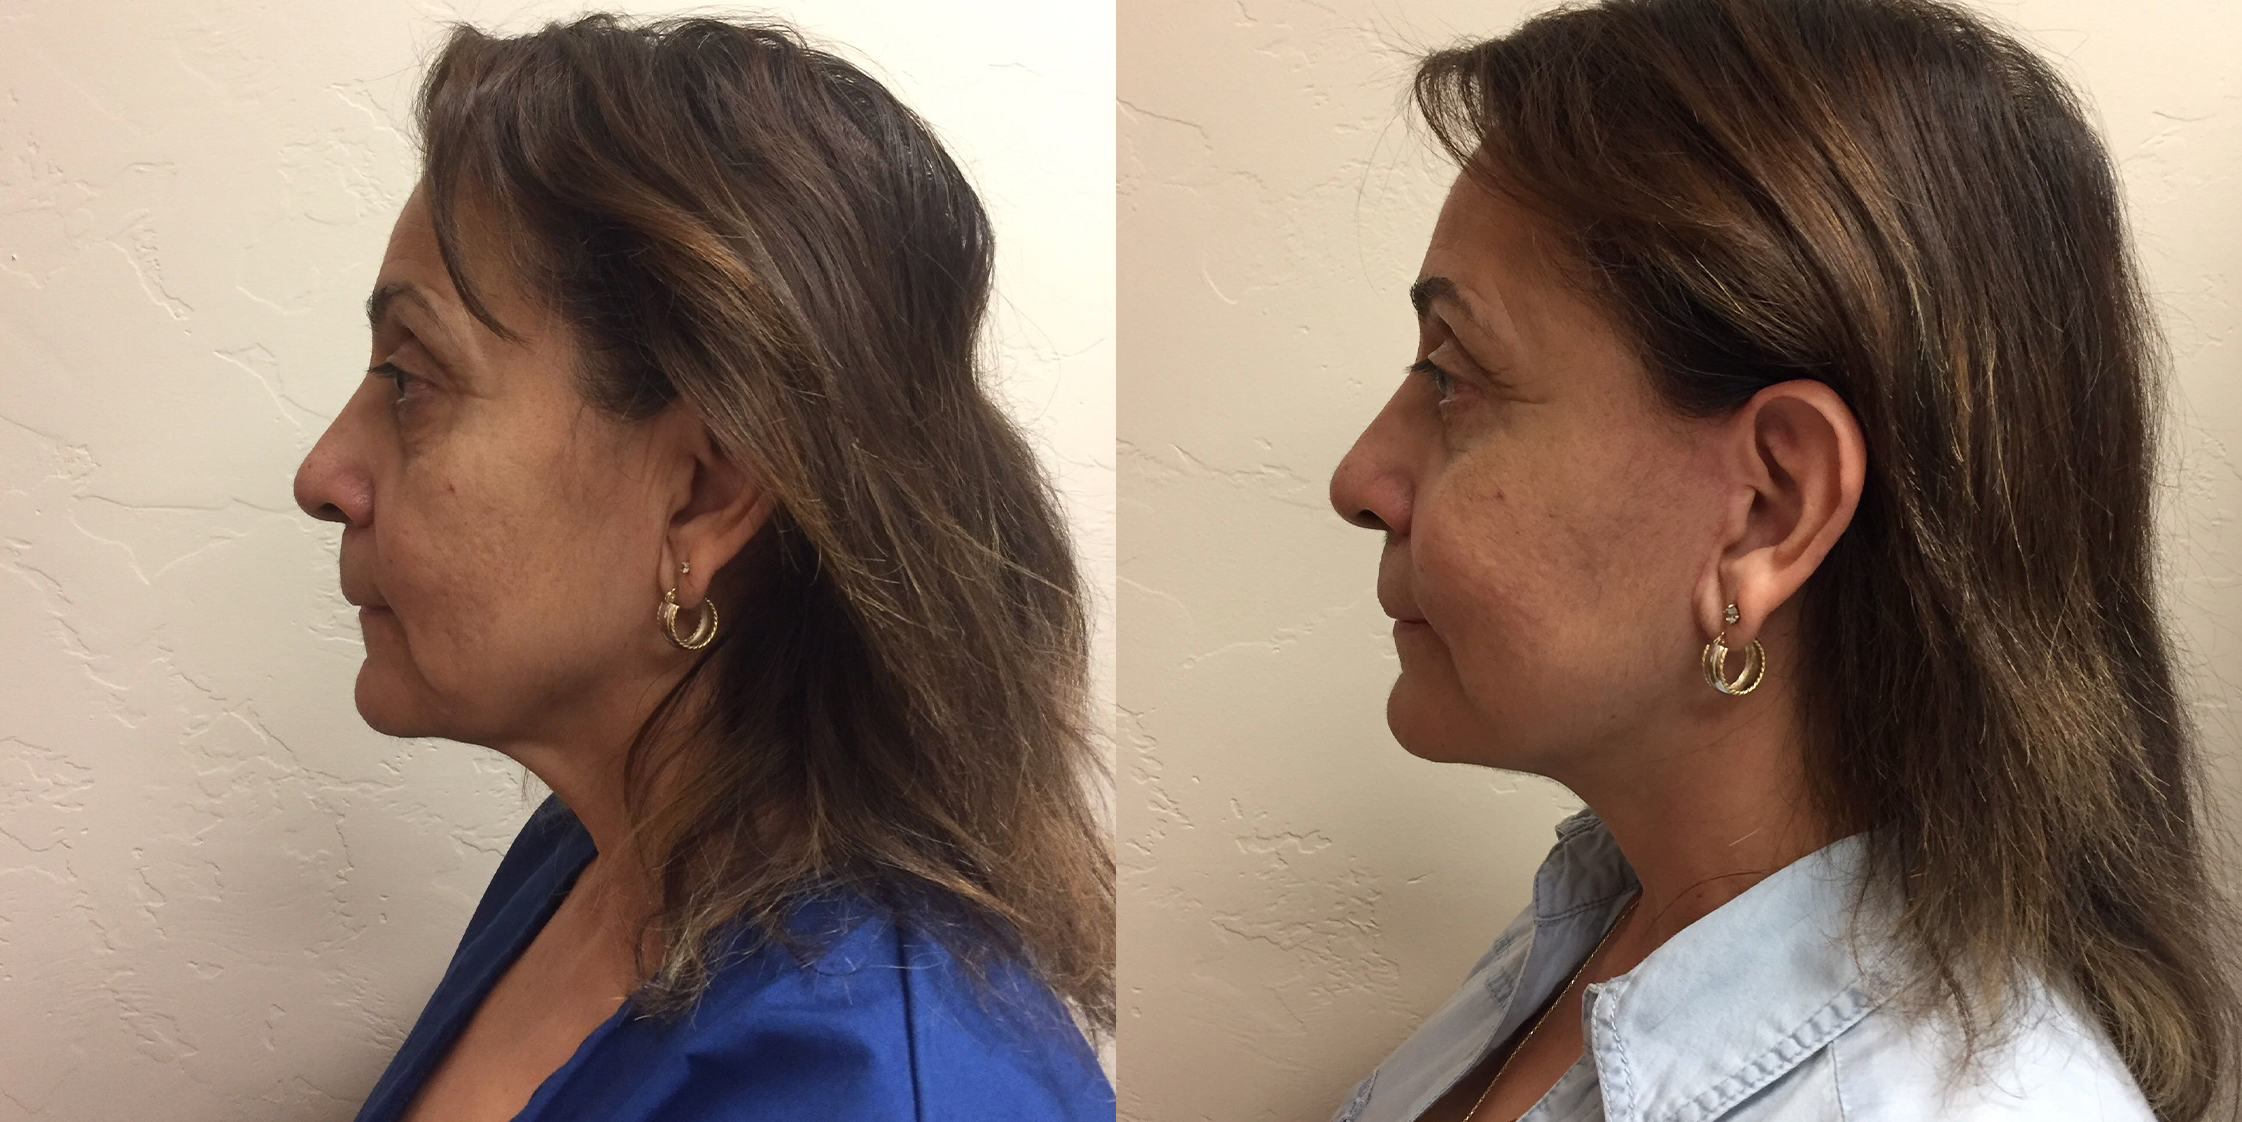 Hess-Sandeen-Facelift-Tucson-before-after7-1024x683